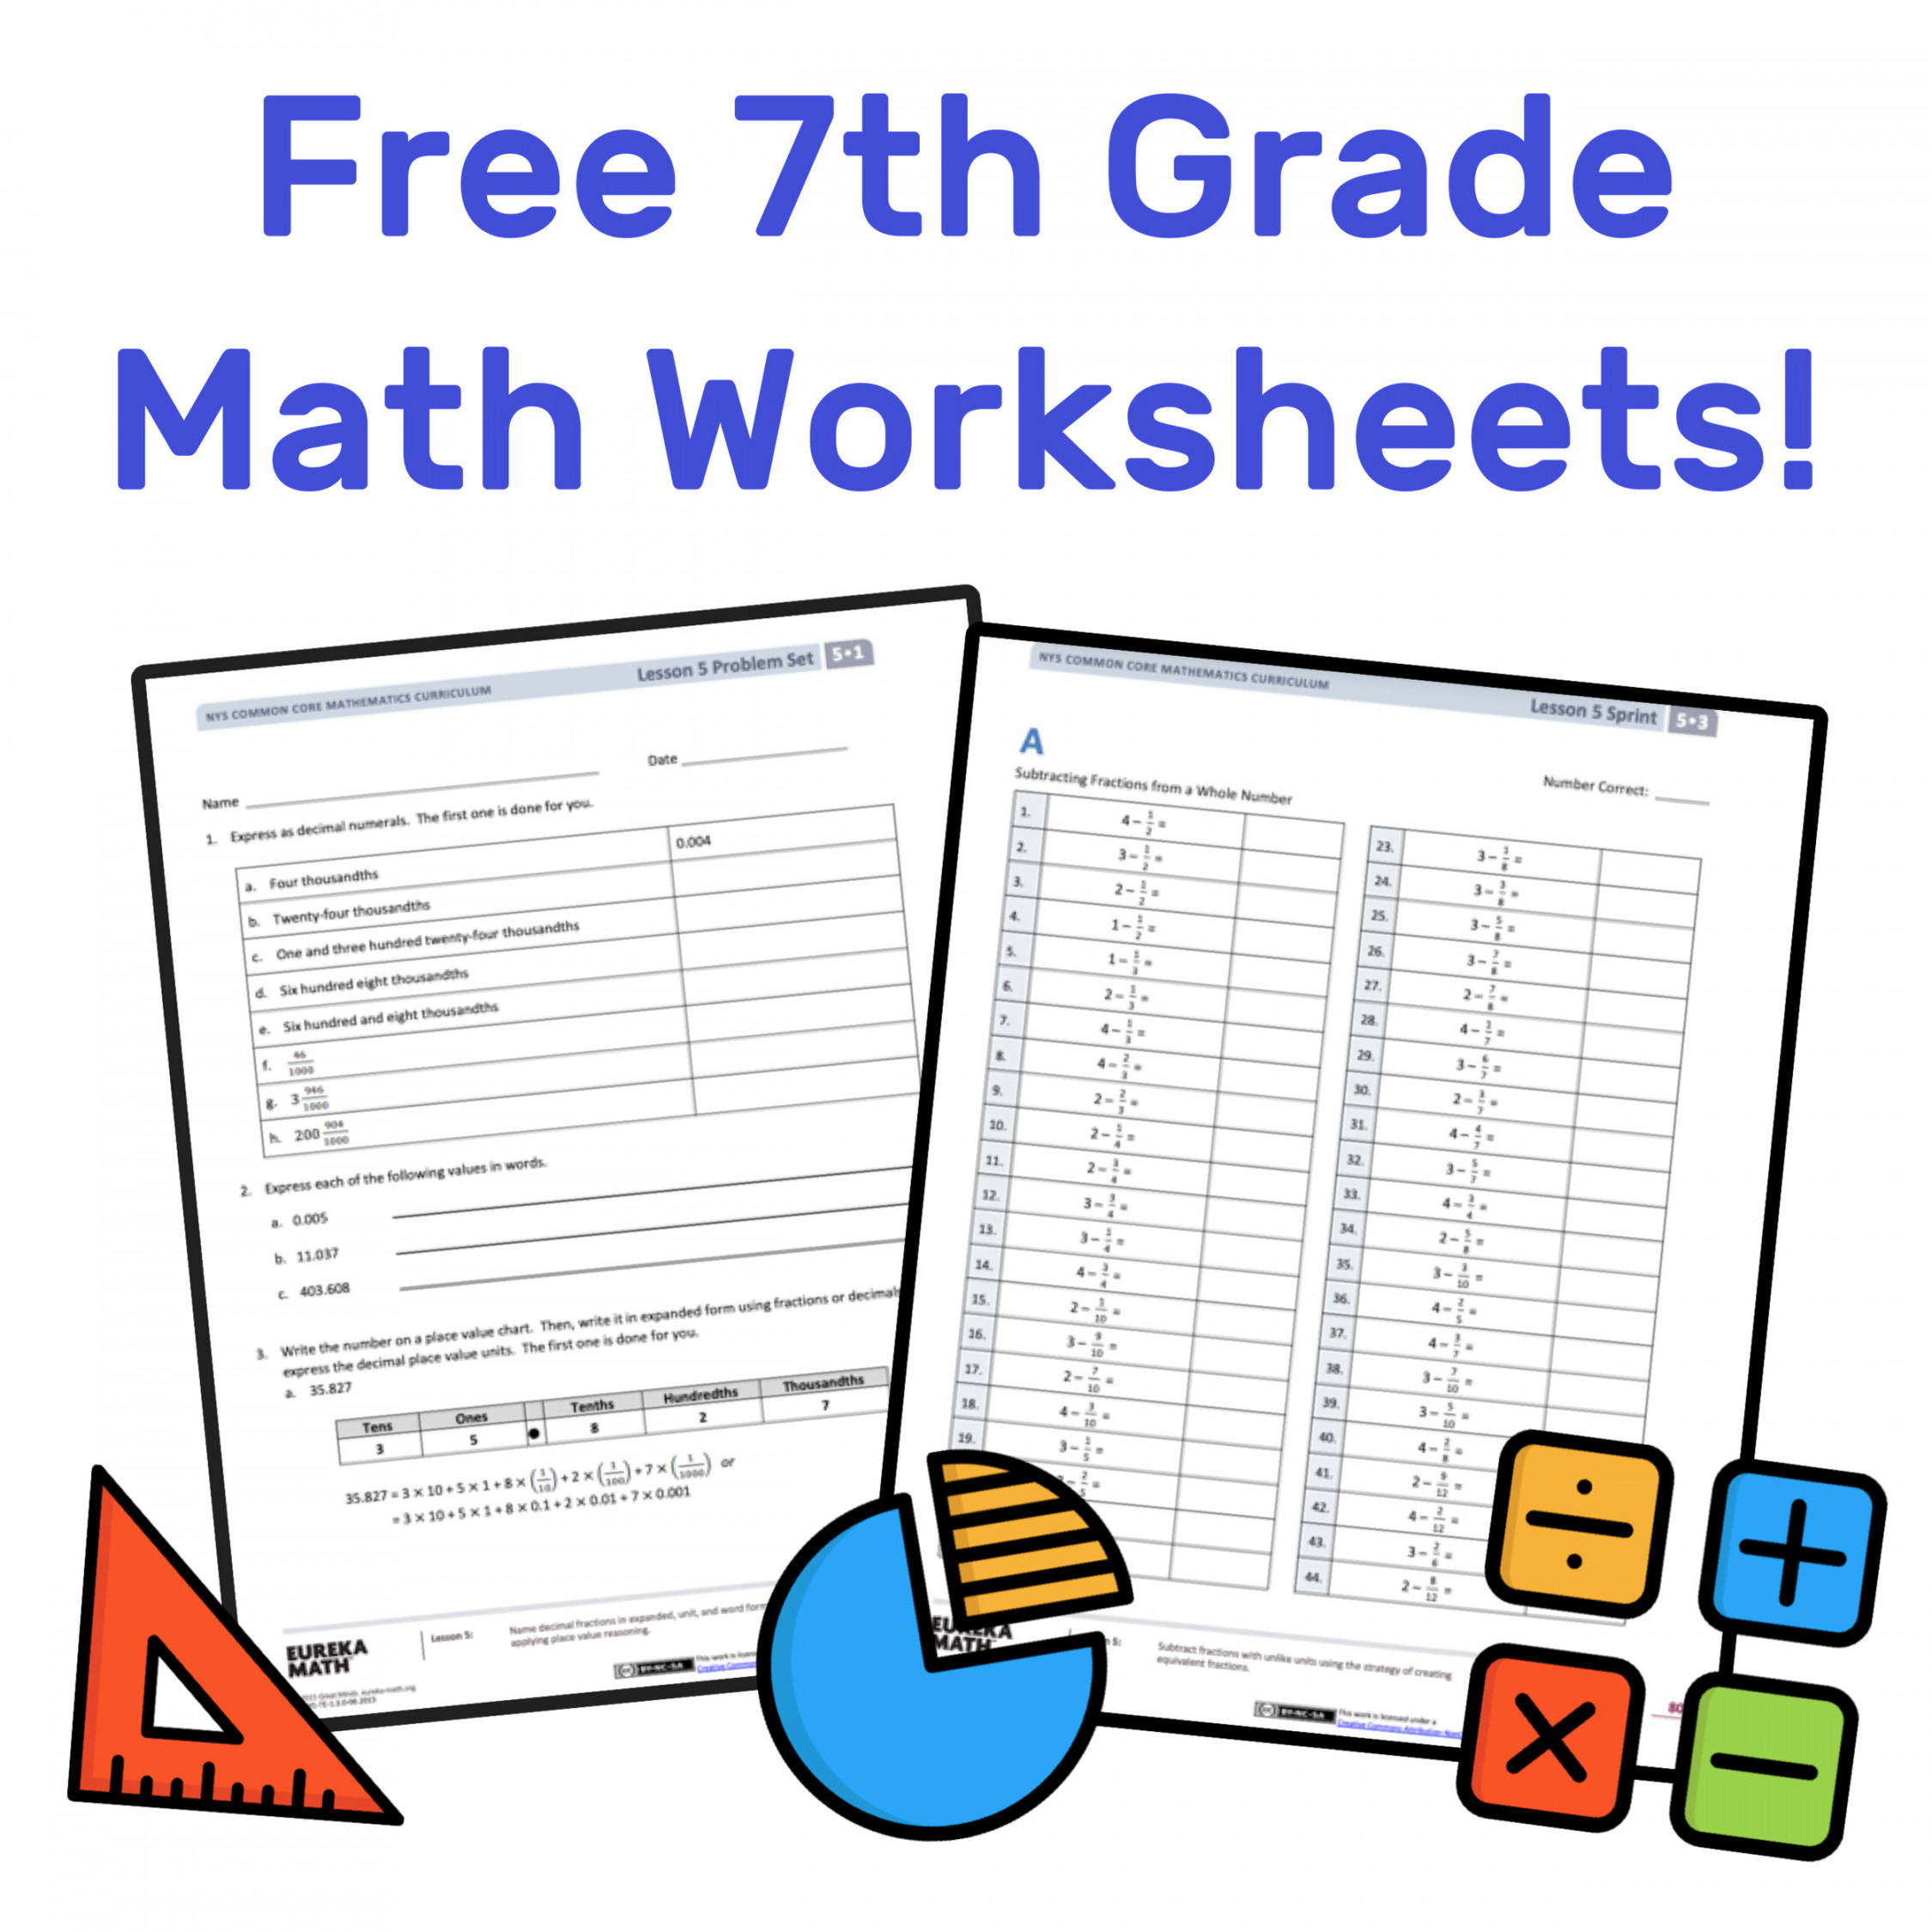 The Best Free th Grade Math Resources: Complete List! — Mashup Math